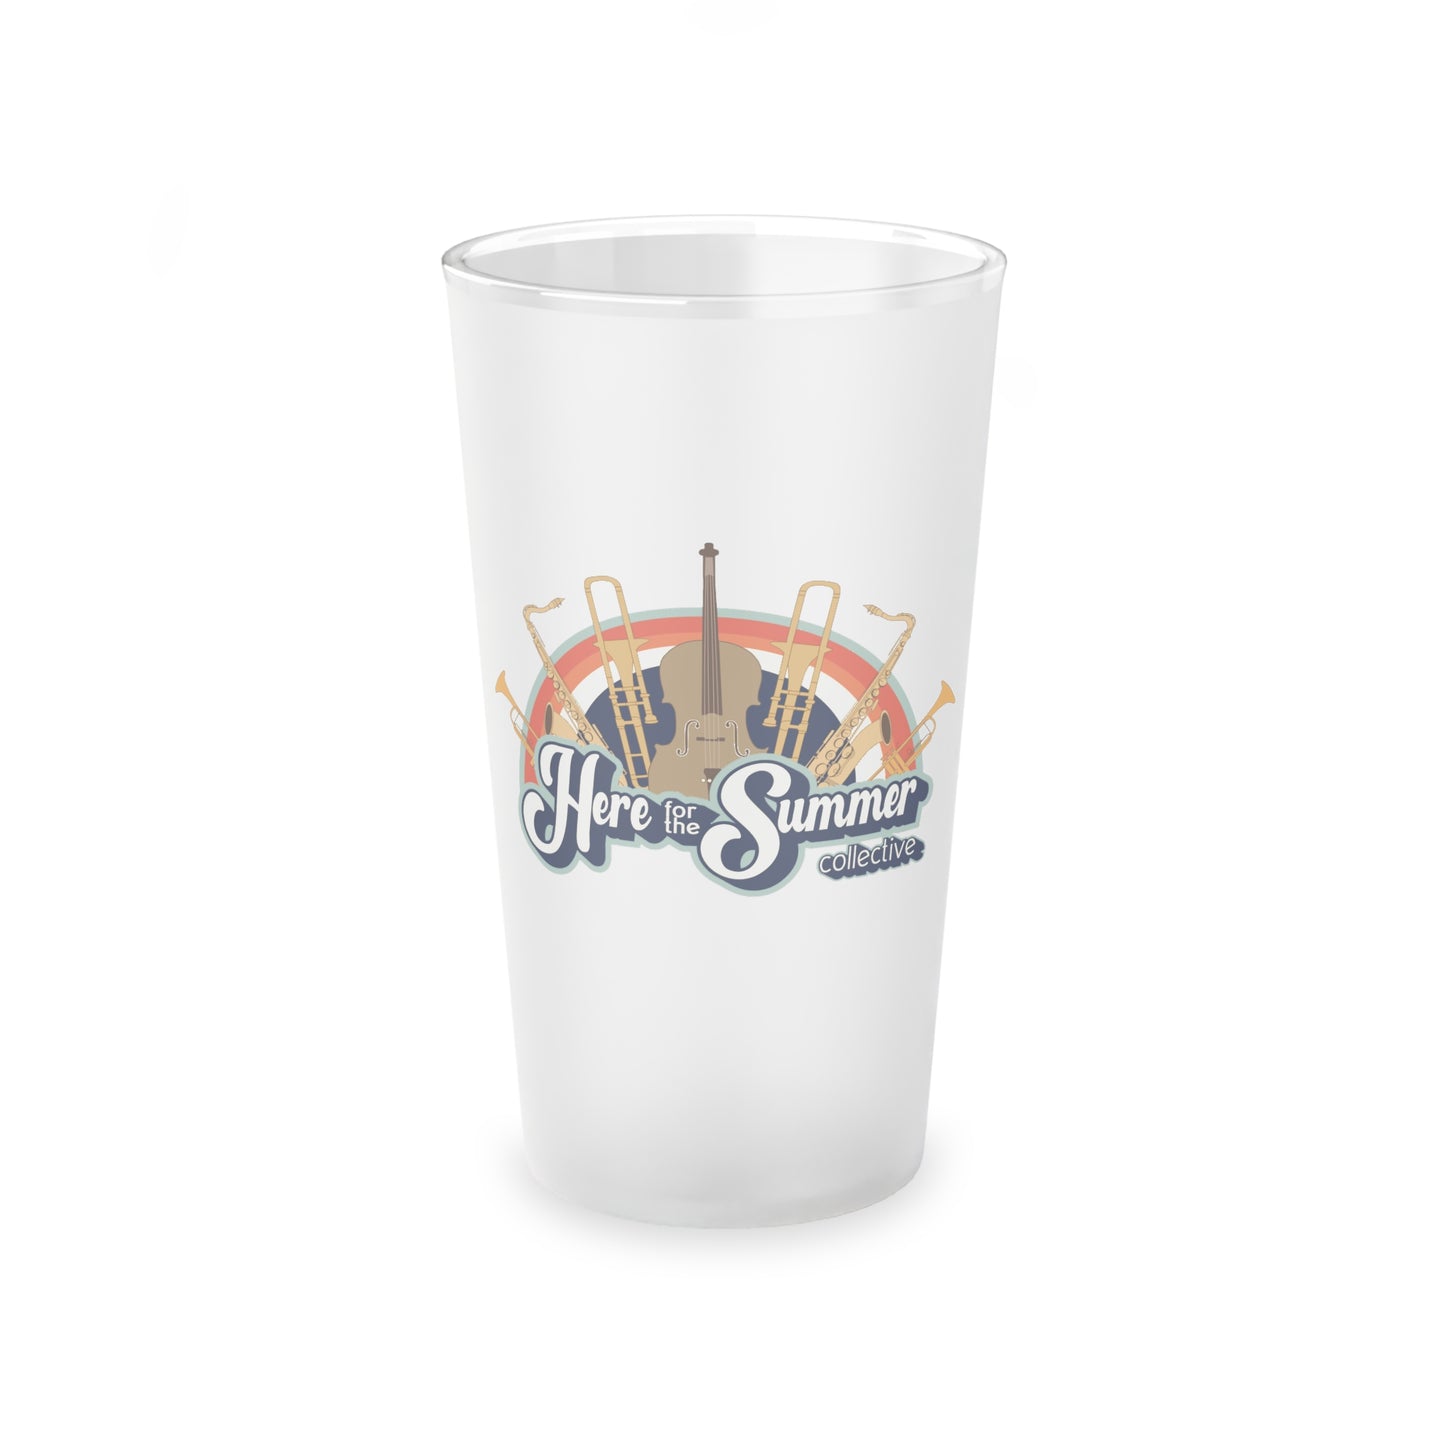 Here for the Summer Frosted Pint Glass, 16oz